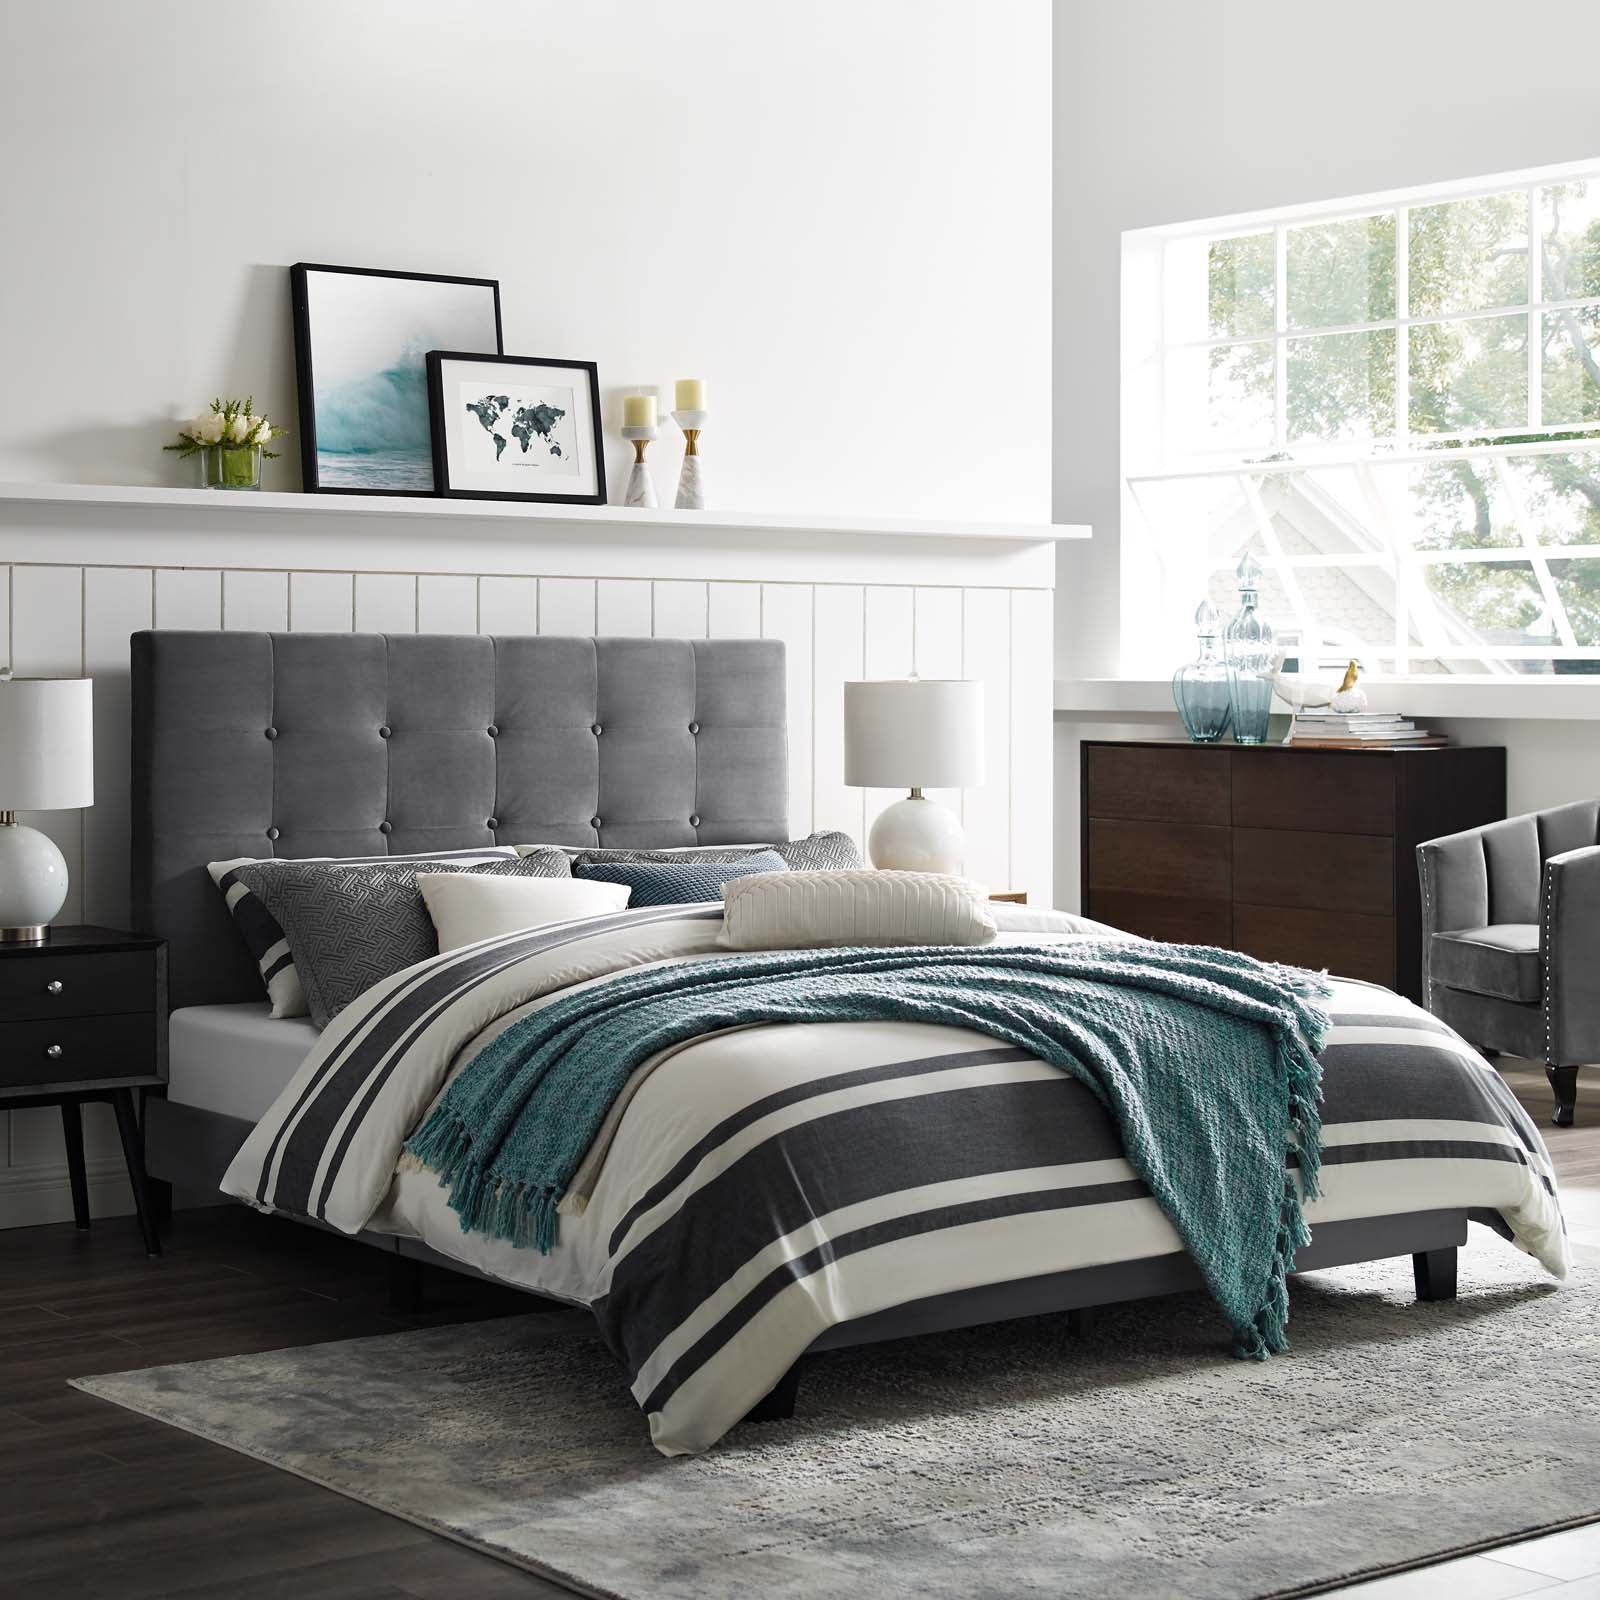 Modway Beds - Melanie Tufted Button Upholstered Platform King Bed Gray